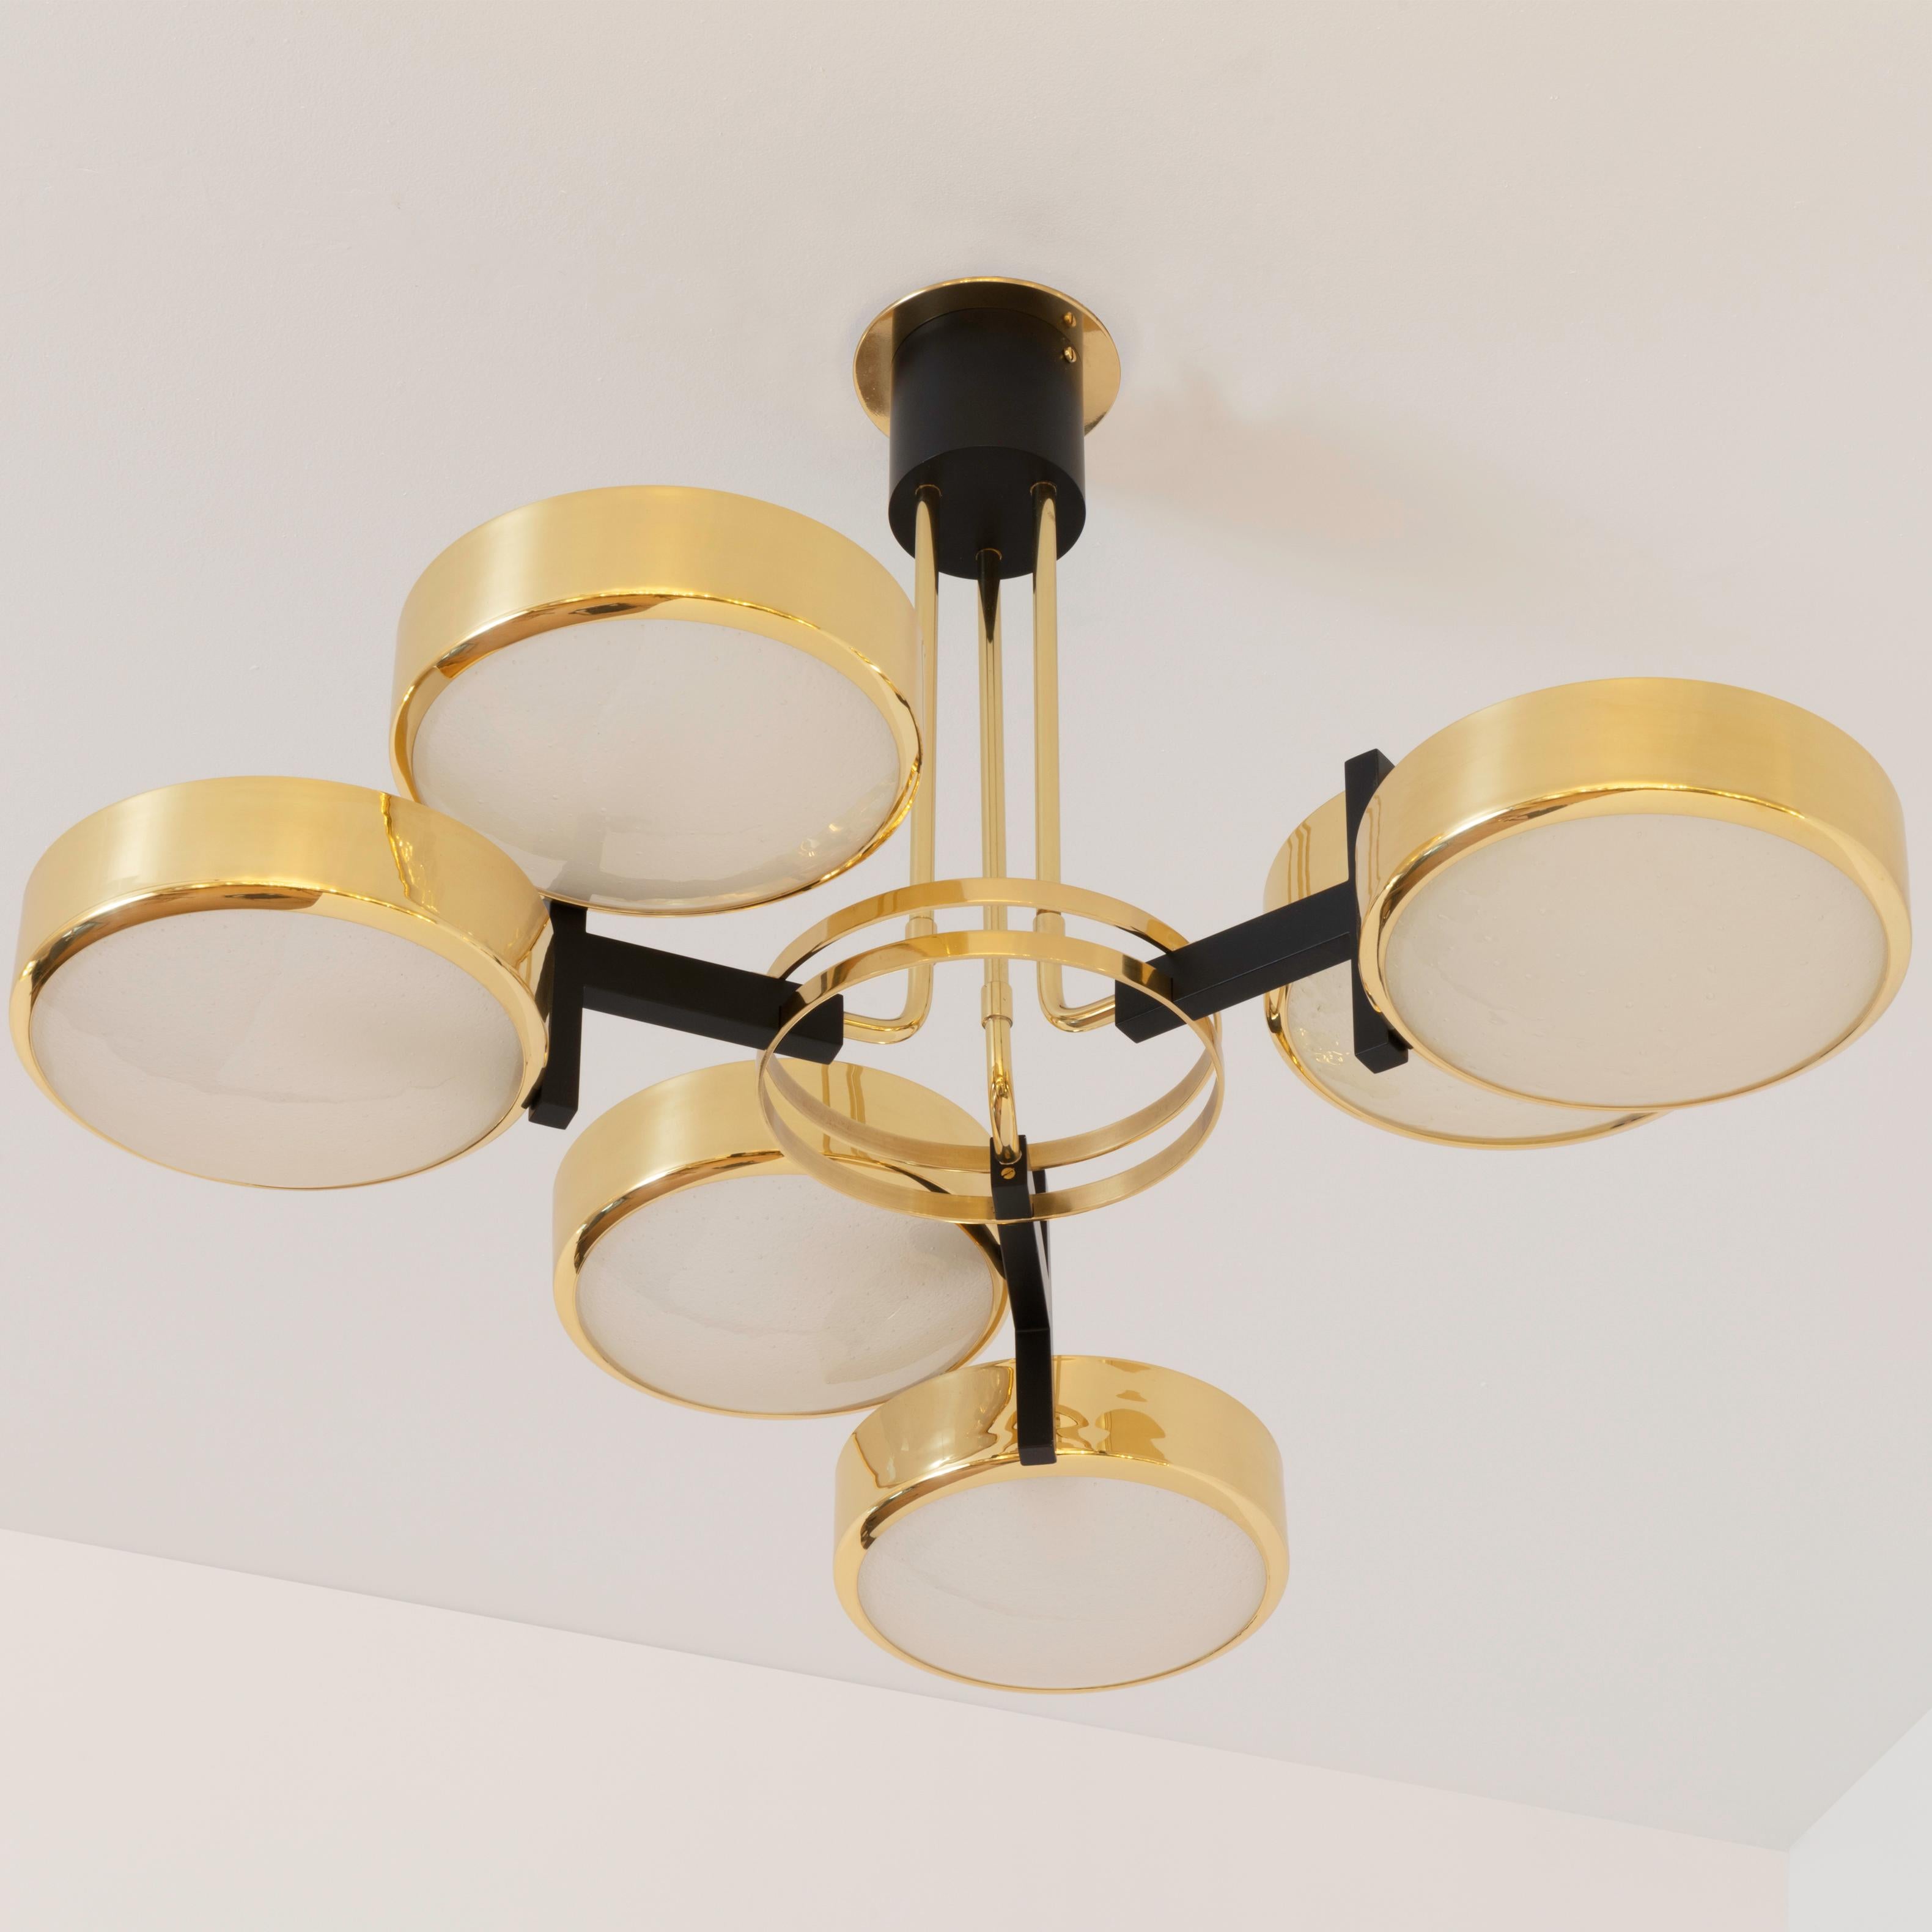 Italian Eclissi Ceiling Light by Gaspare Asaro - Bronze Finish Murano Glass Version For Sale